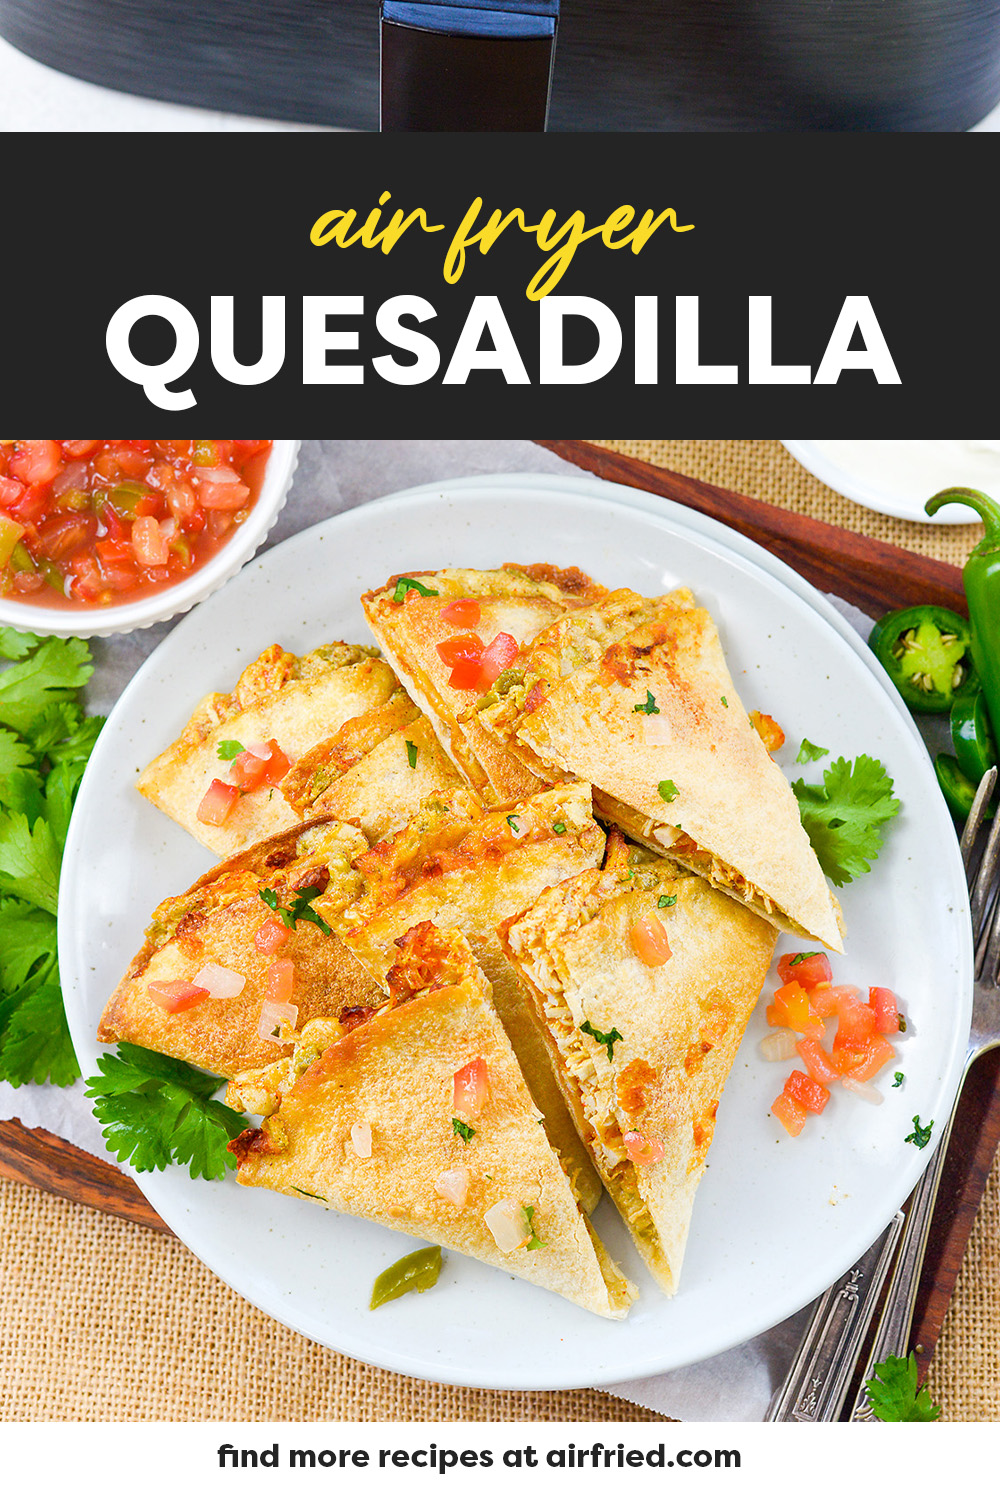 Overhead view of a sliced quesadilla.